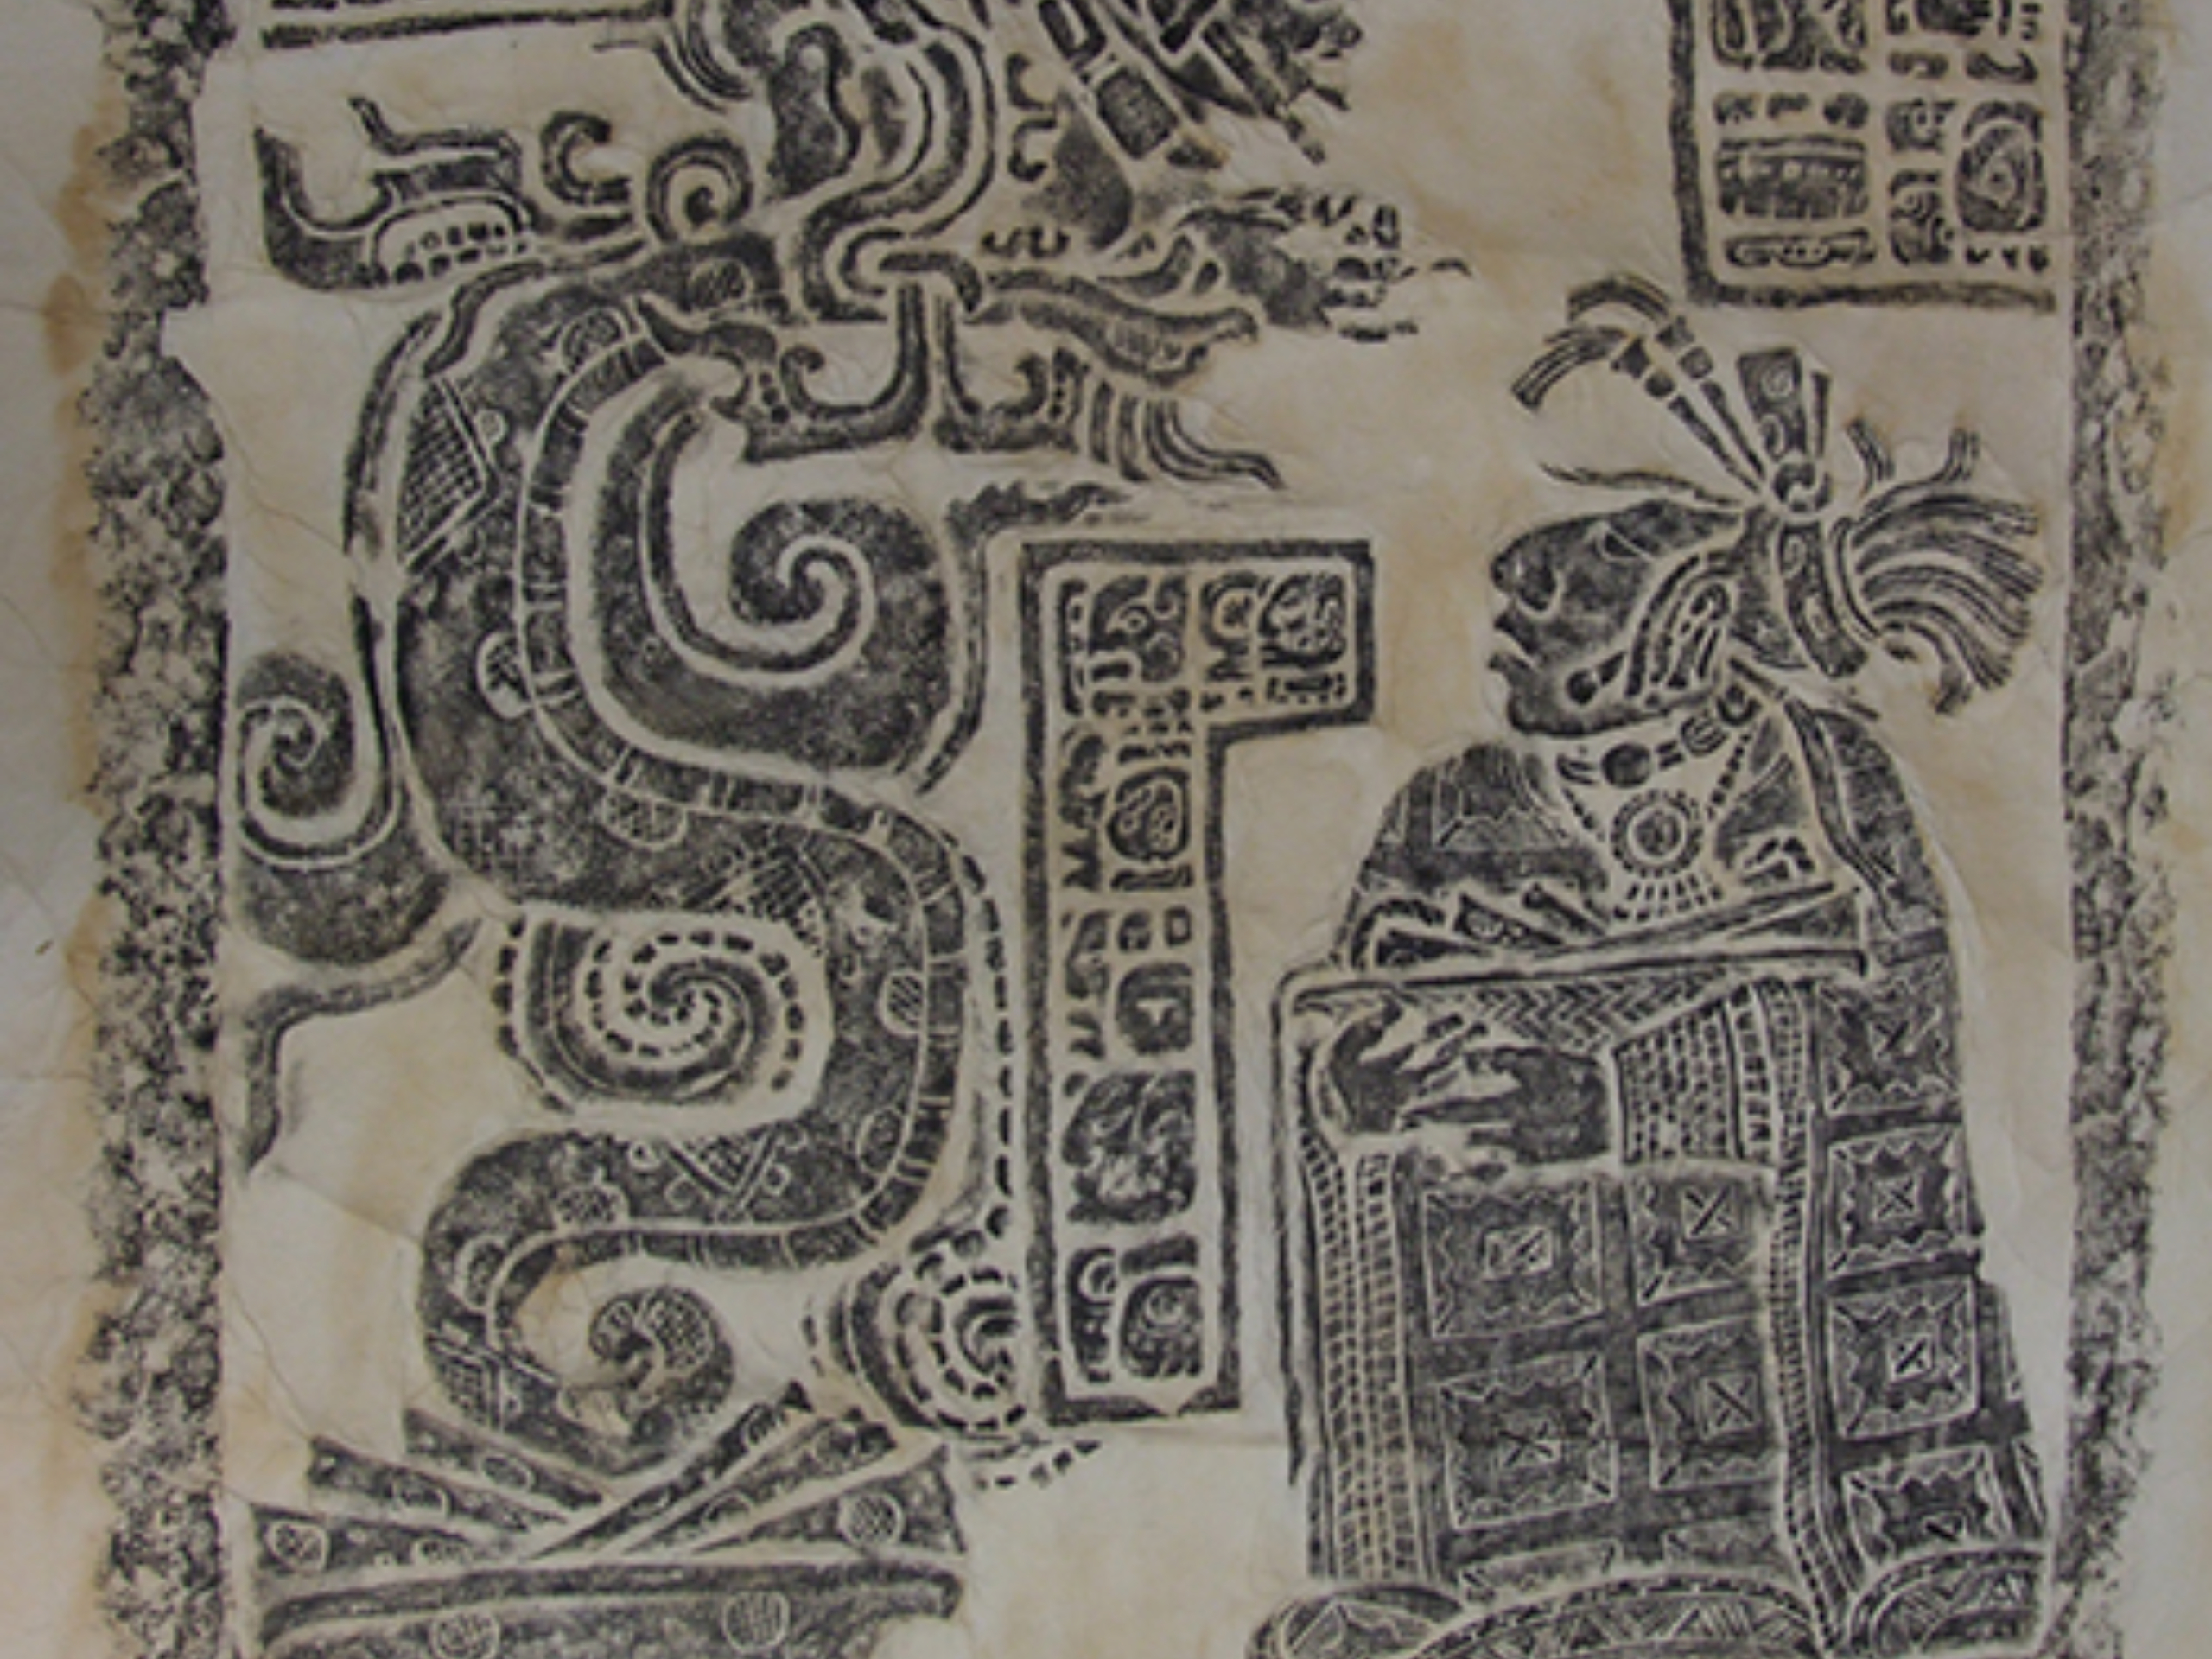 Image: Rubbing of Lintel 15 from the site of Yaxchilán, Chiapas, Mexico. From the Merle Greene Robertson Collection 133, Manuscripts Collection.